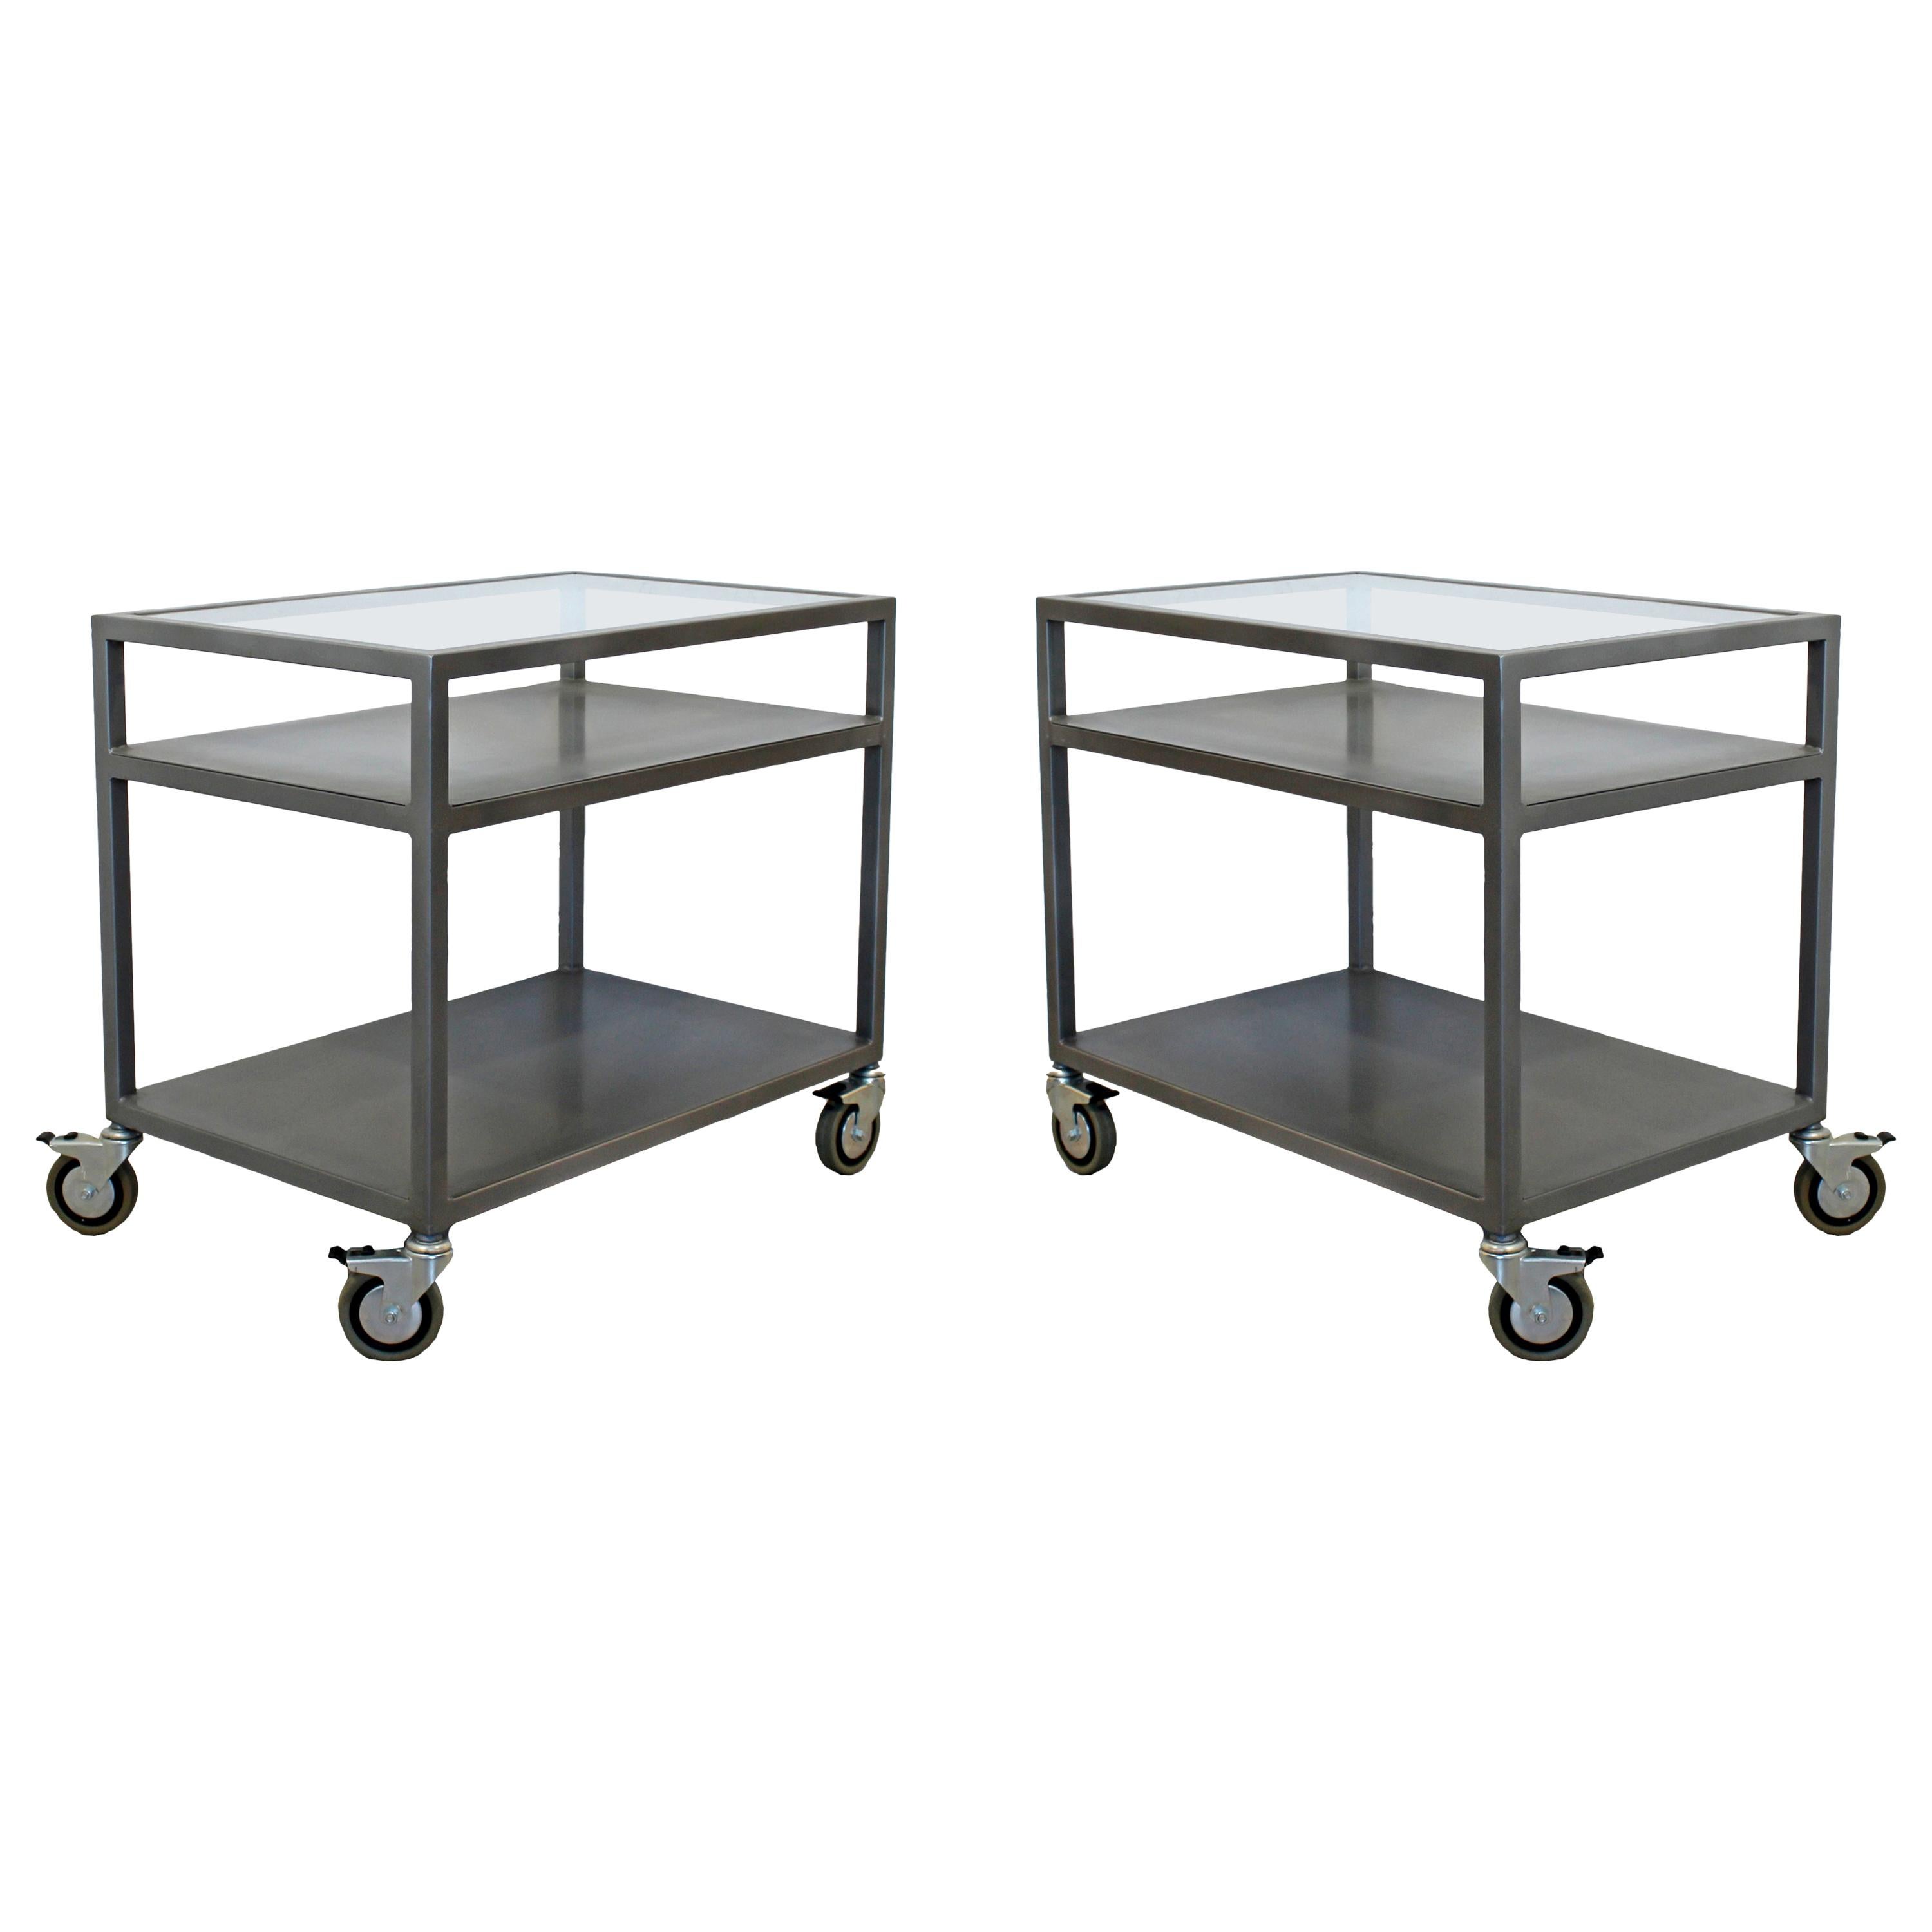 Contemporary Modernist Pair of 2-Tier Metal and Smoked Glass Serving Bar Carts